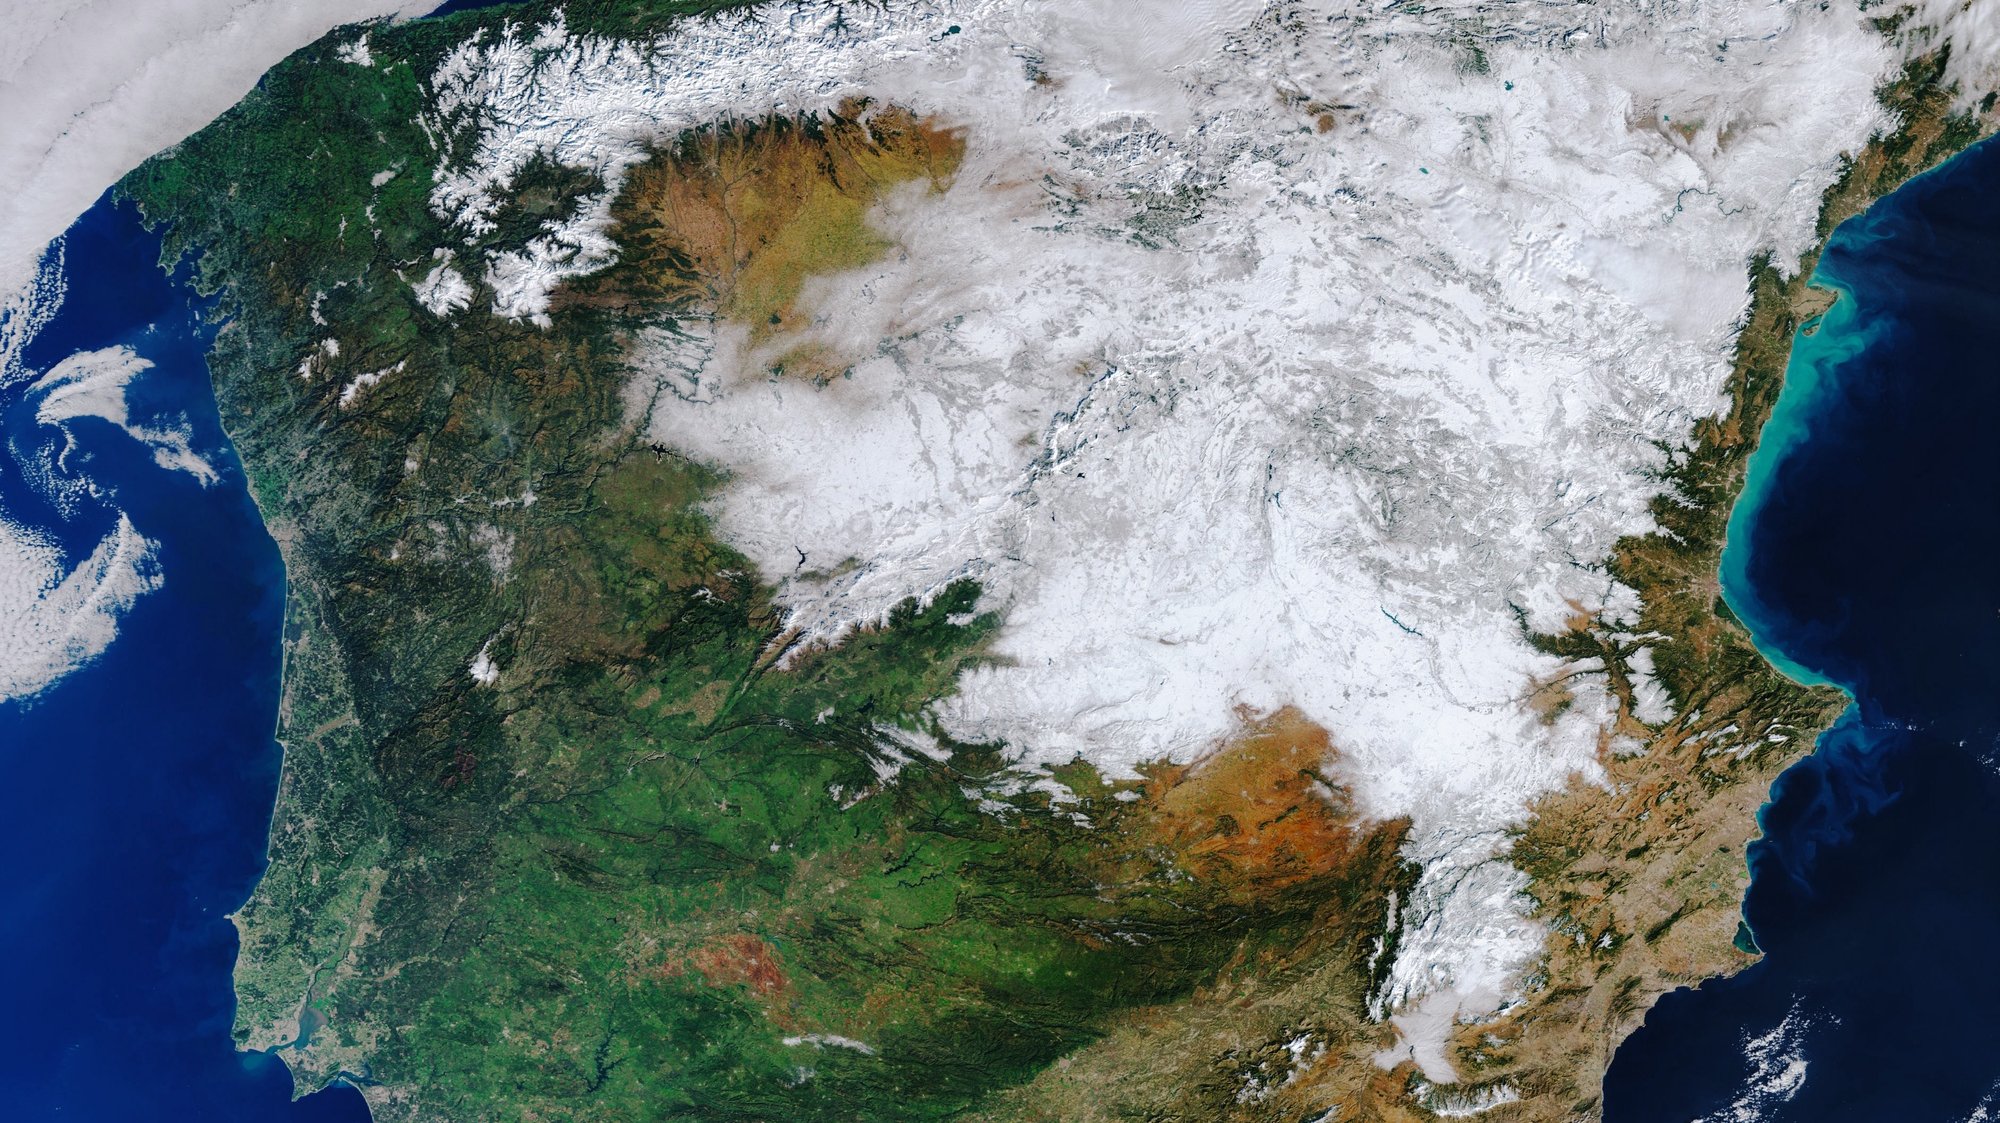 epa08936901 A handout picture made available by the European Space Agency (ESA) shows a satellite image captured by the Copernicus Sentinel-3 mission on 12 January 2021 of the heavy snowfall that hit Spain a few days ago still covering much of the country (issued 14 January 2021). Storm Filomena hit Spain between 07 and 09 January, covering a large part of the country in thick snow. Madrid one of the worst affected areas, was brought to a standstill with the airport having to be closed, trains cancelled and roads blocked.  EPA/EUROPEAN SPACE AGENCY HANDOUT -- contains modified Copernicus Sentinel data (2021), processed by ESA -- HANDOUT EDITORIAL USE ONLY/NO SALES